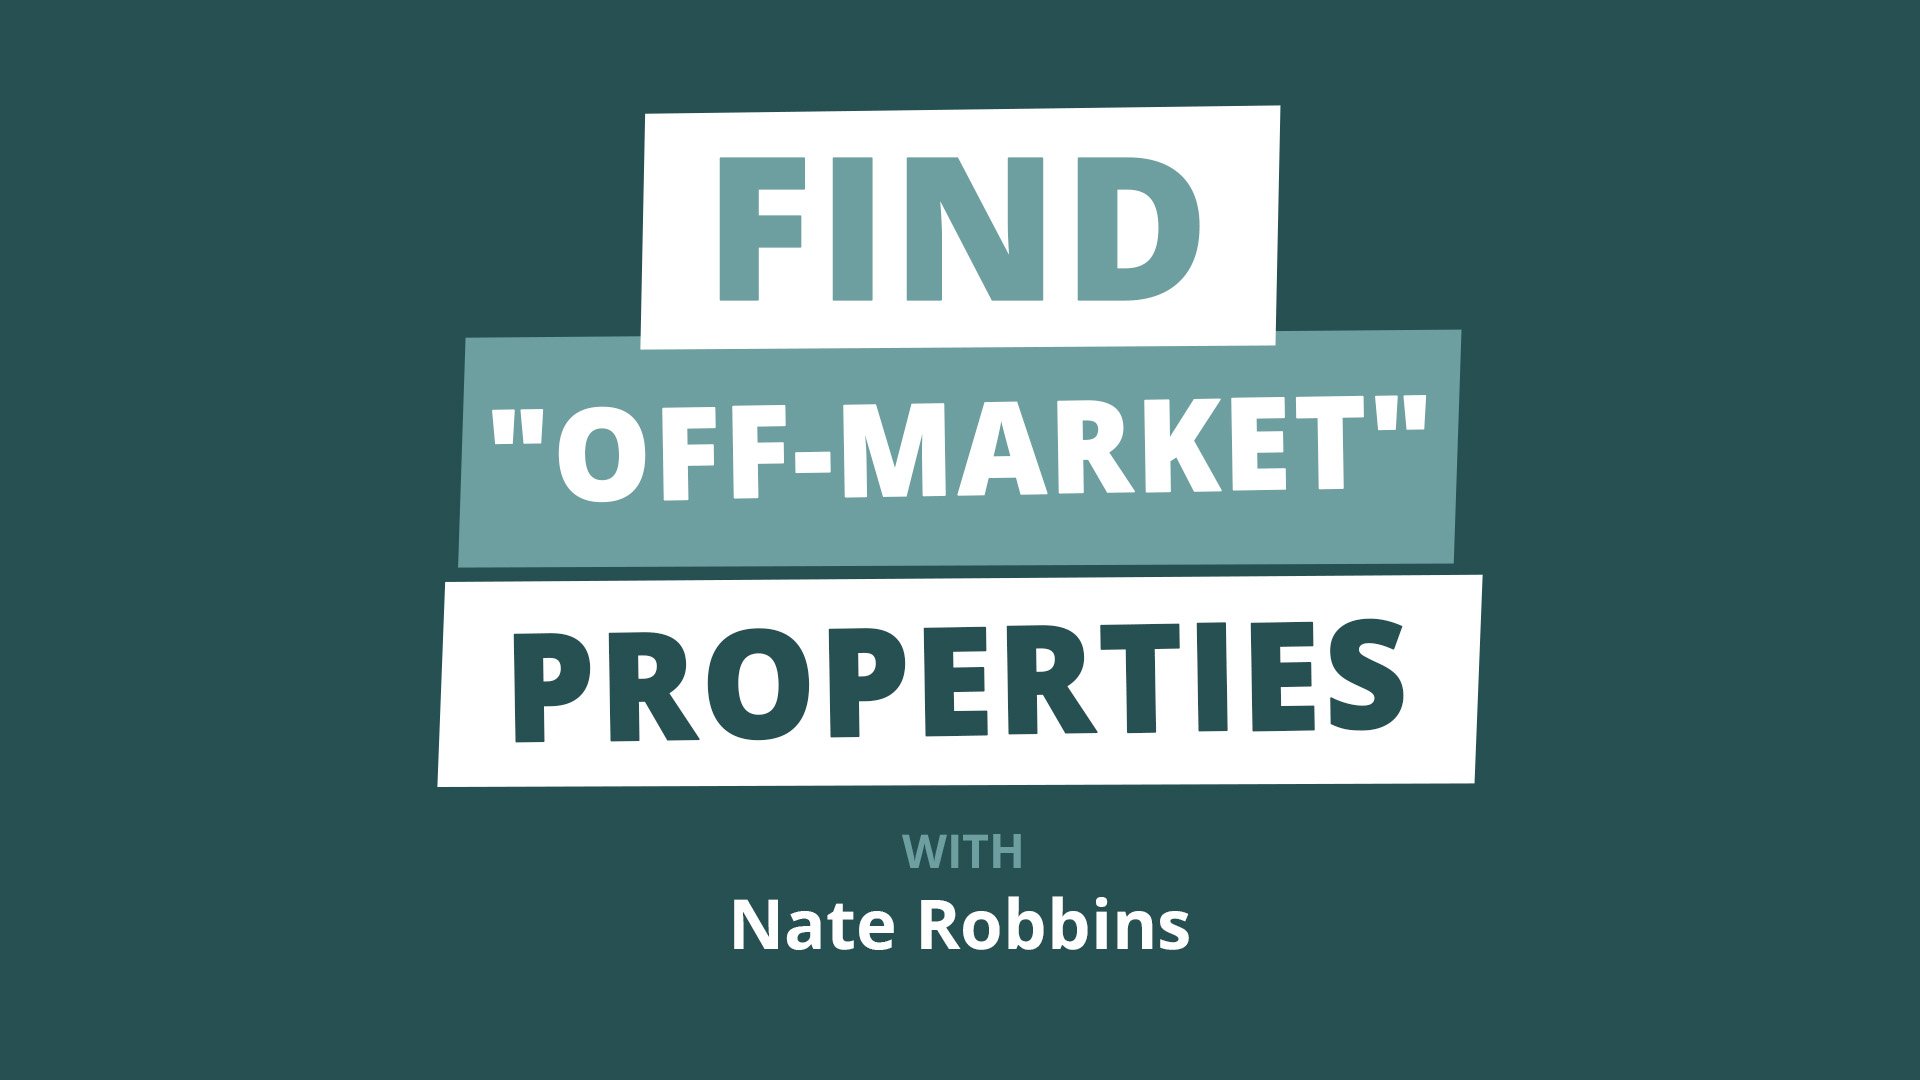 The Step-by-Step Guide to Finding the BEST Off-Market Real Estate Deals